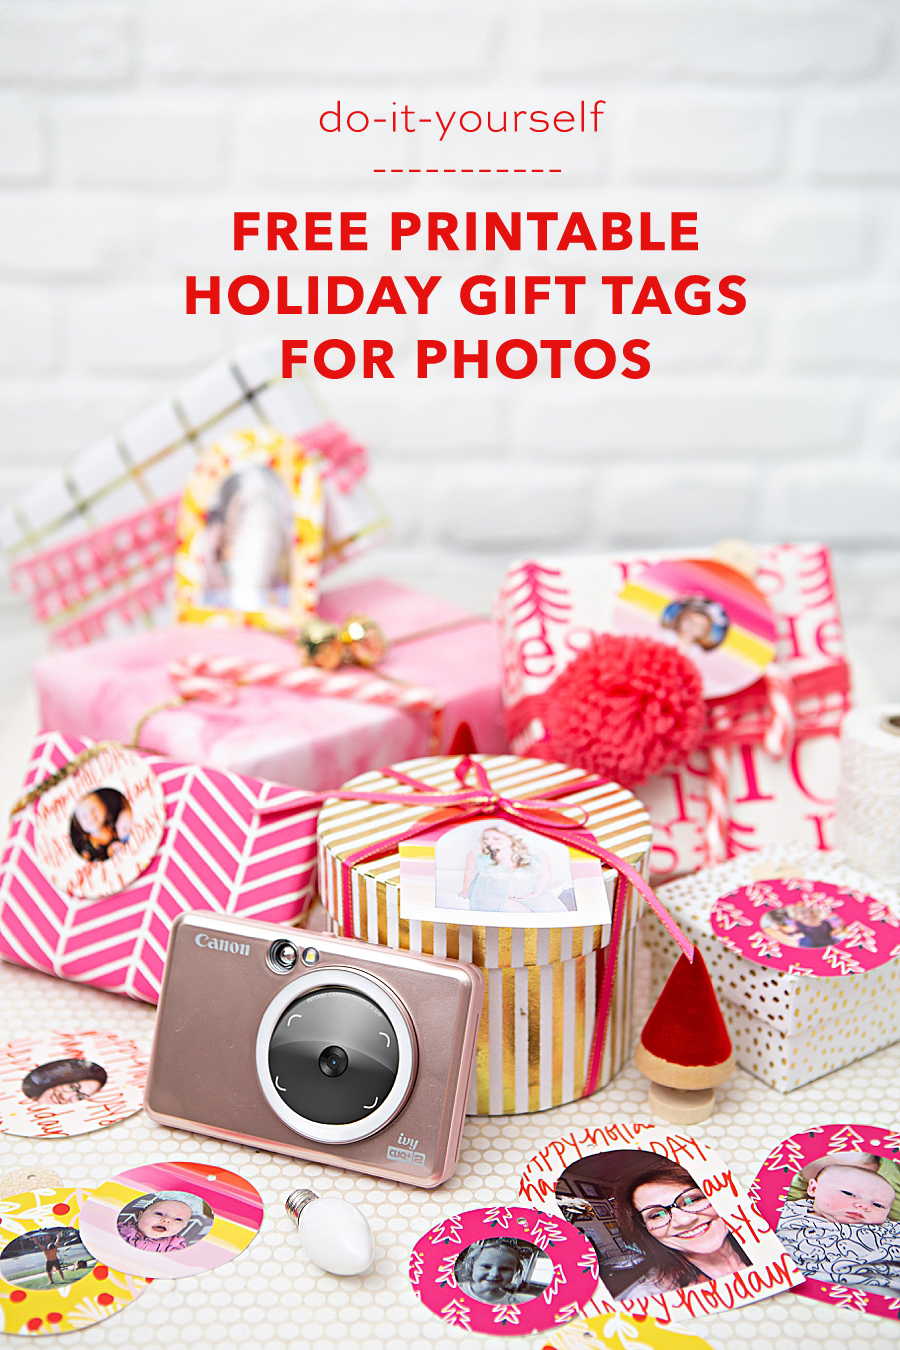 Free printable holiday gift tags for photos!